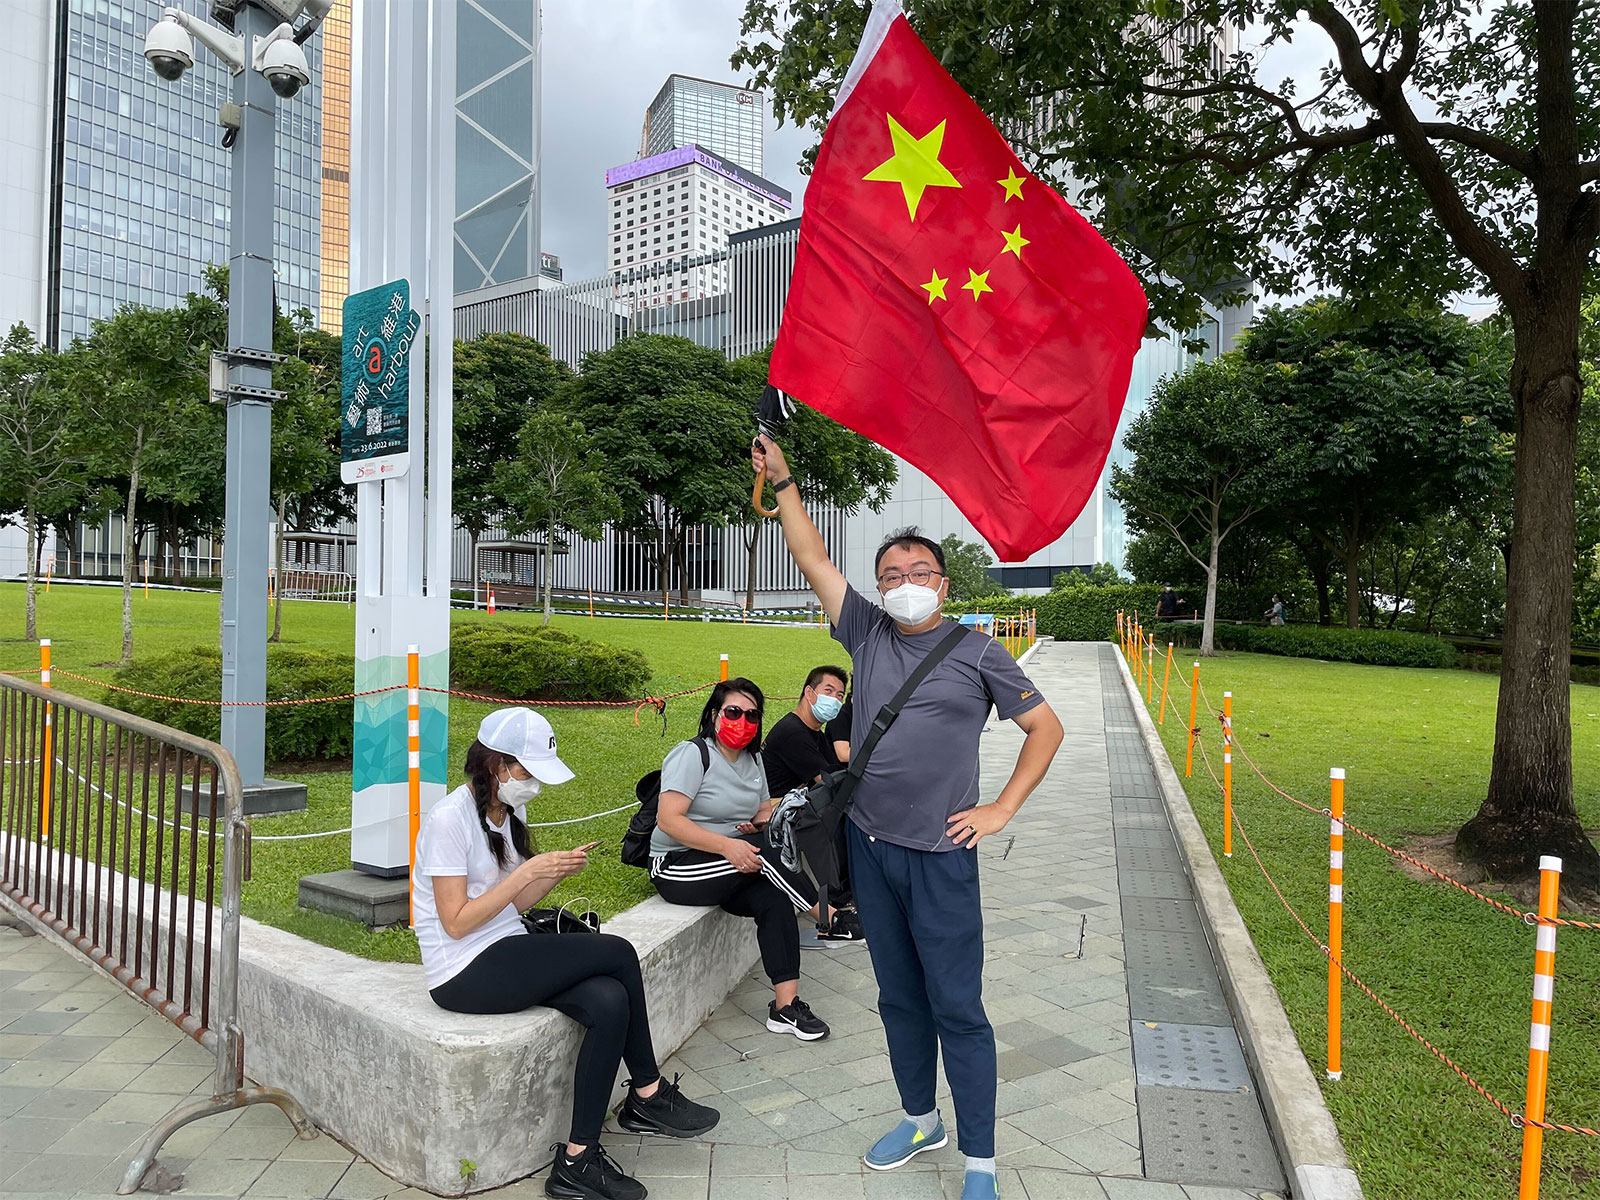 Paul Choi waves the national flag of China, hopeful the new administration would bring stability to Hong Kong as the city marked its 25th year of Chinese rule on July 1.